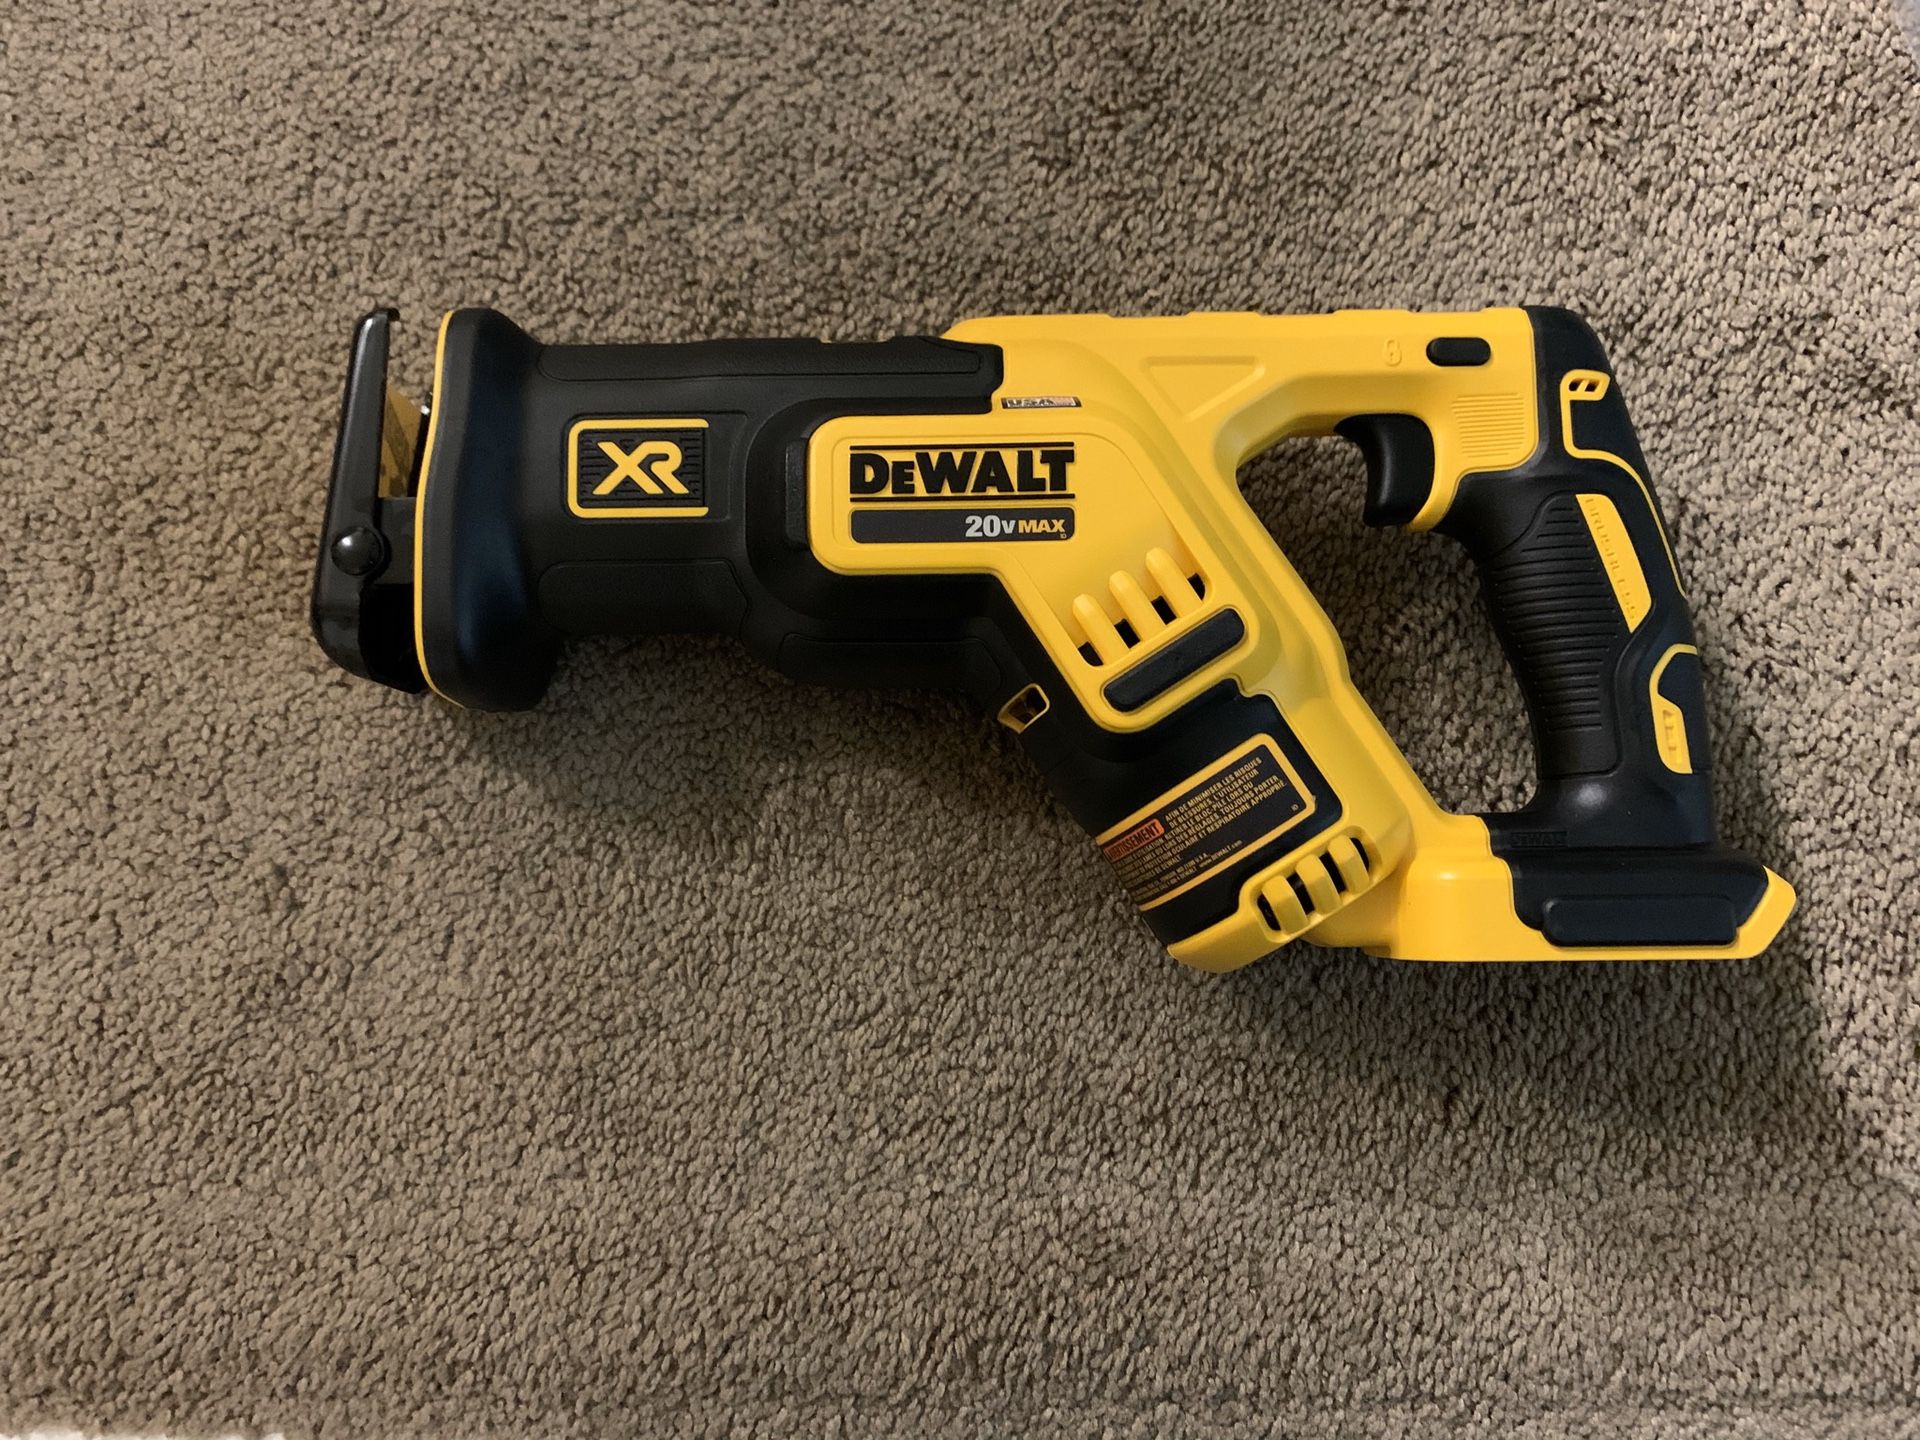 Dewalt 20v max xr brushless compact reciprocating saw tool only